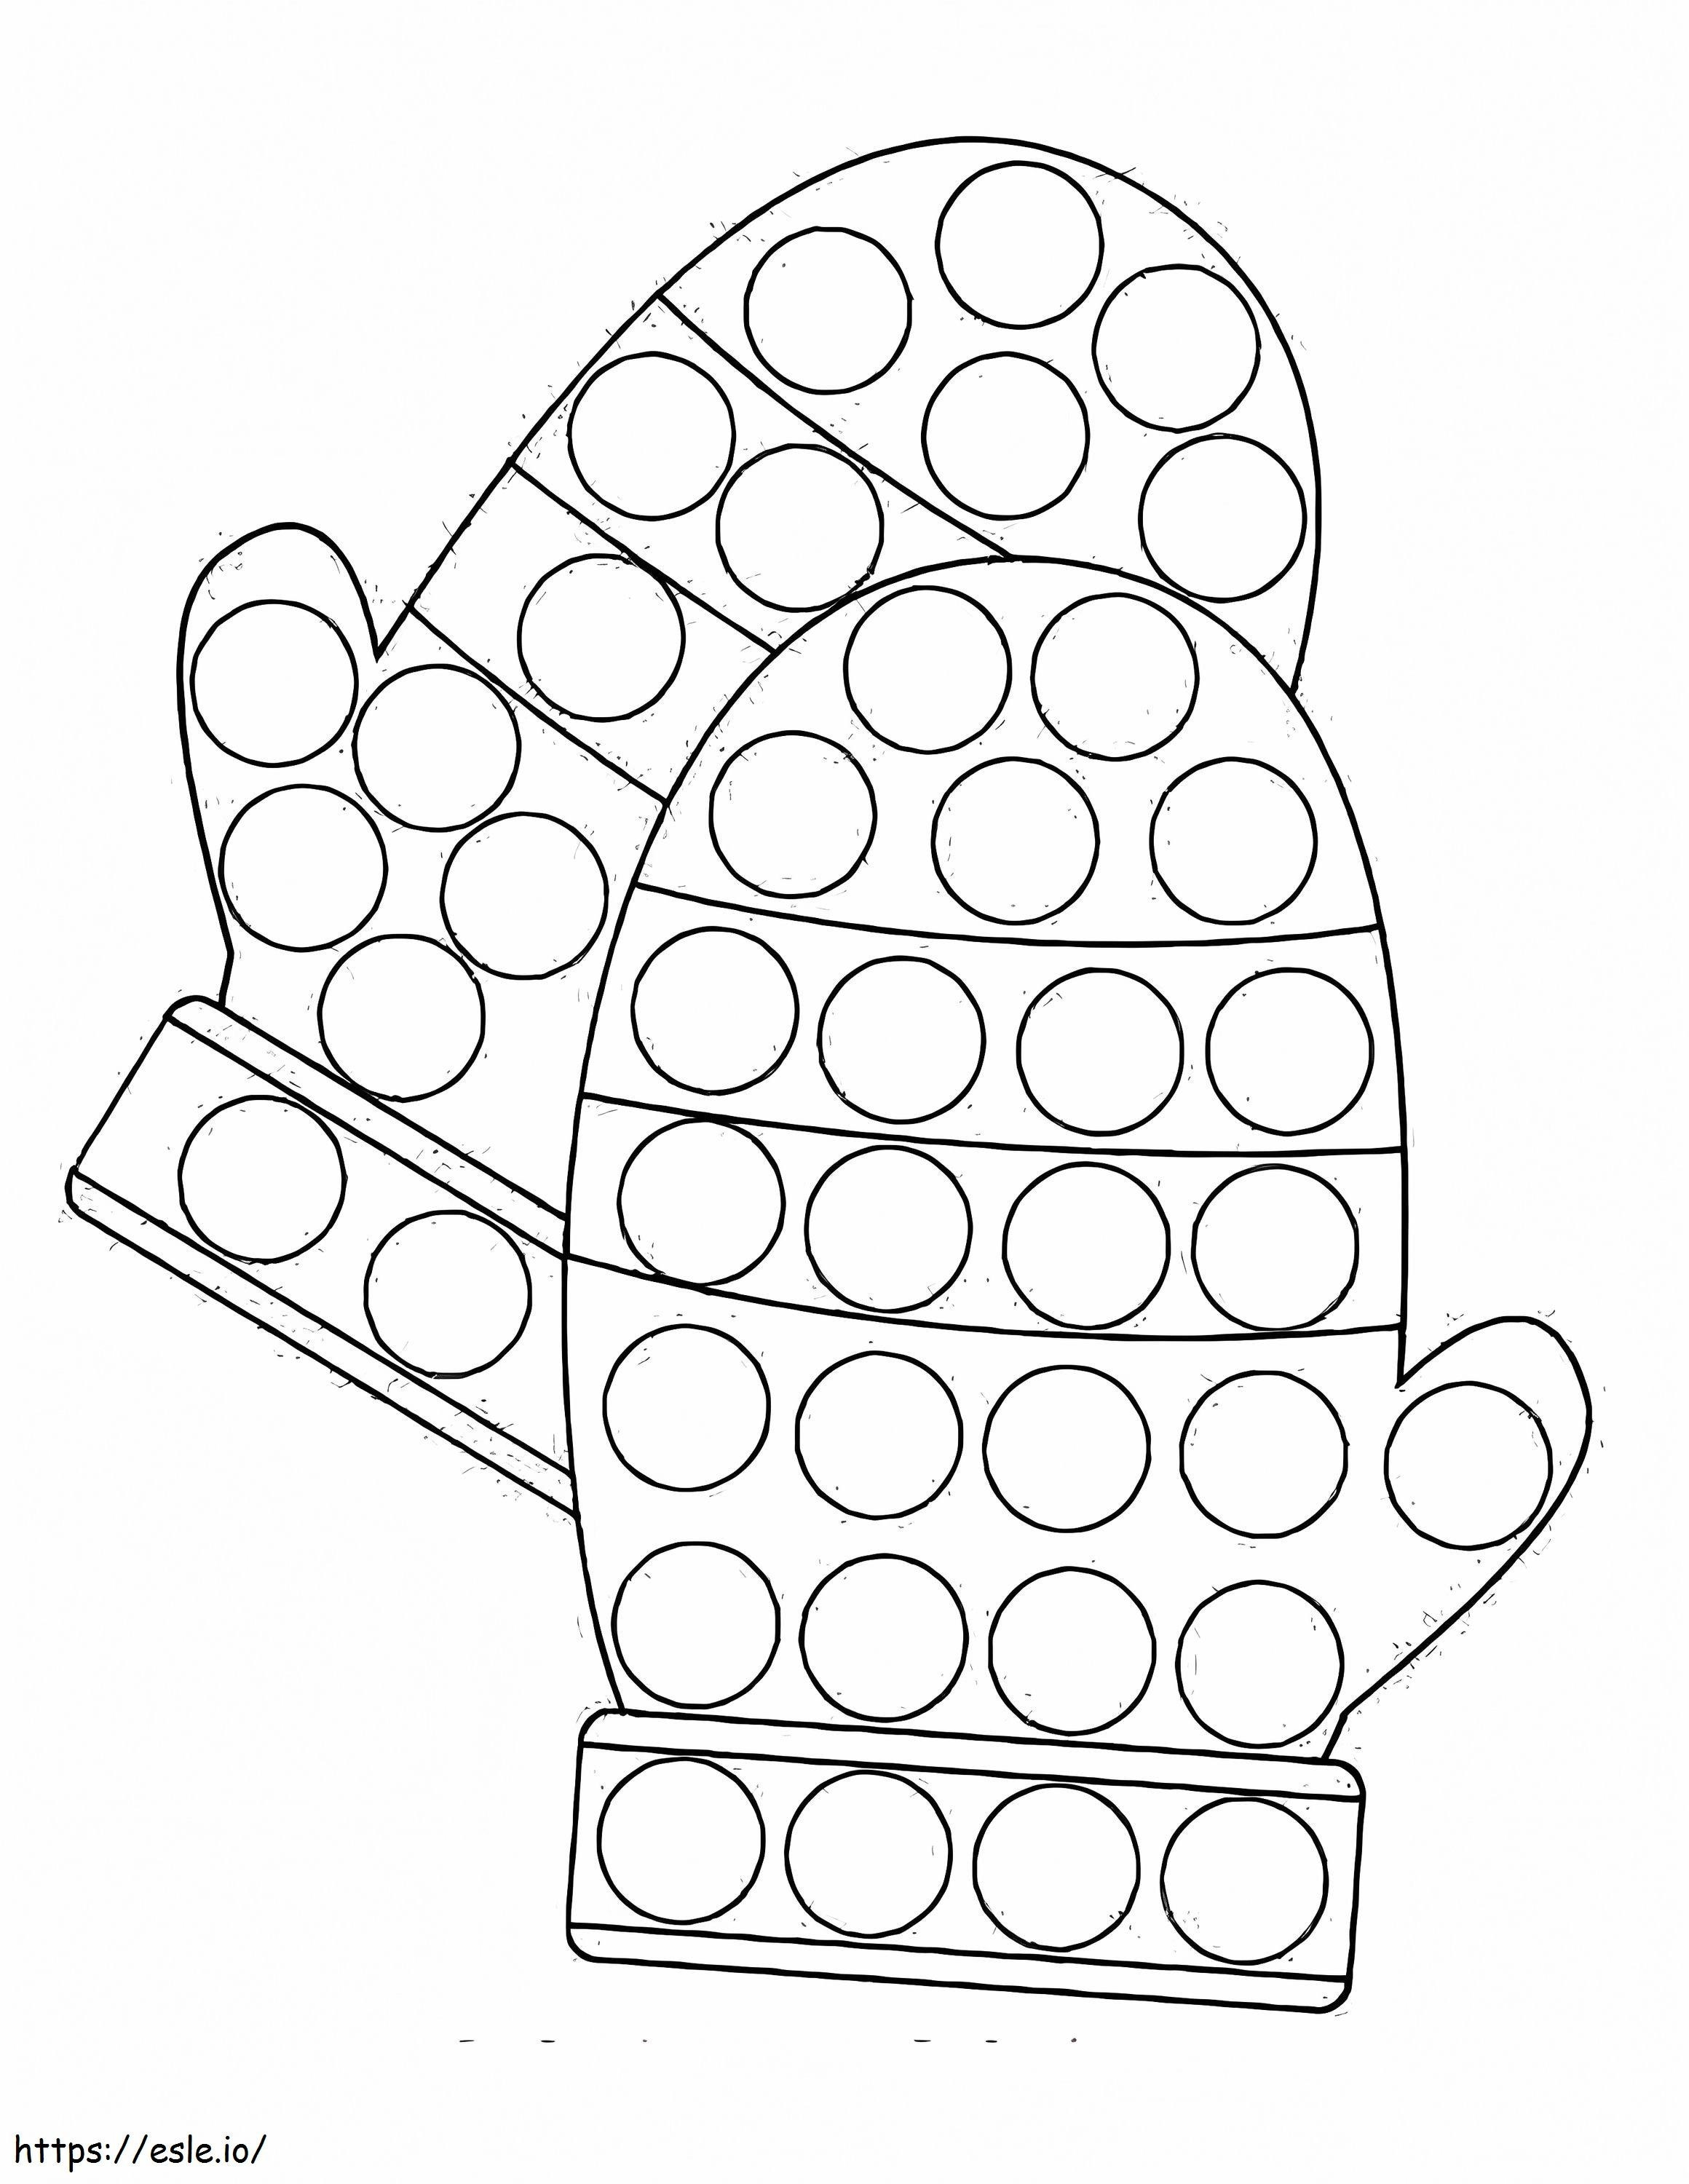 Mittens Dot Marker coloring page